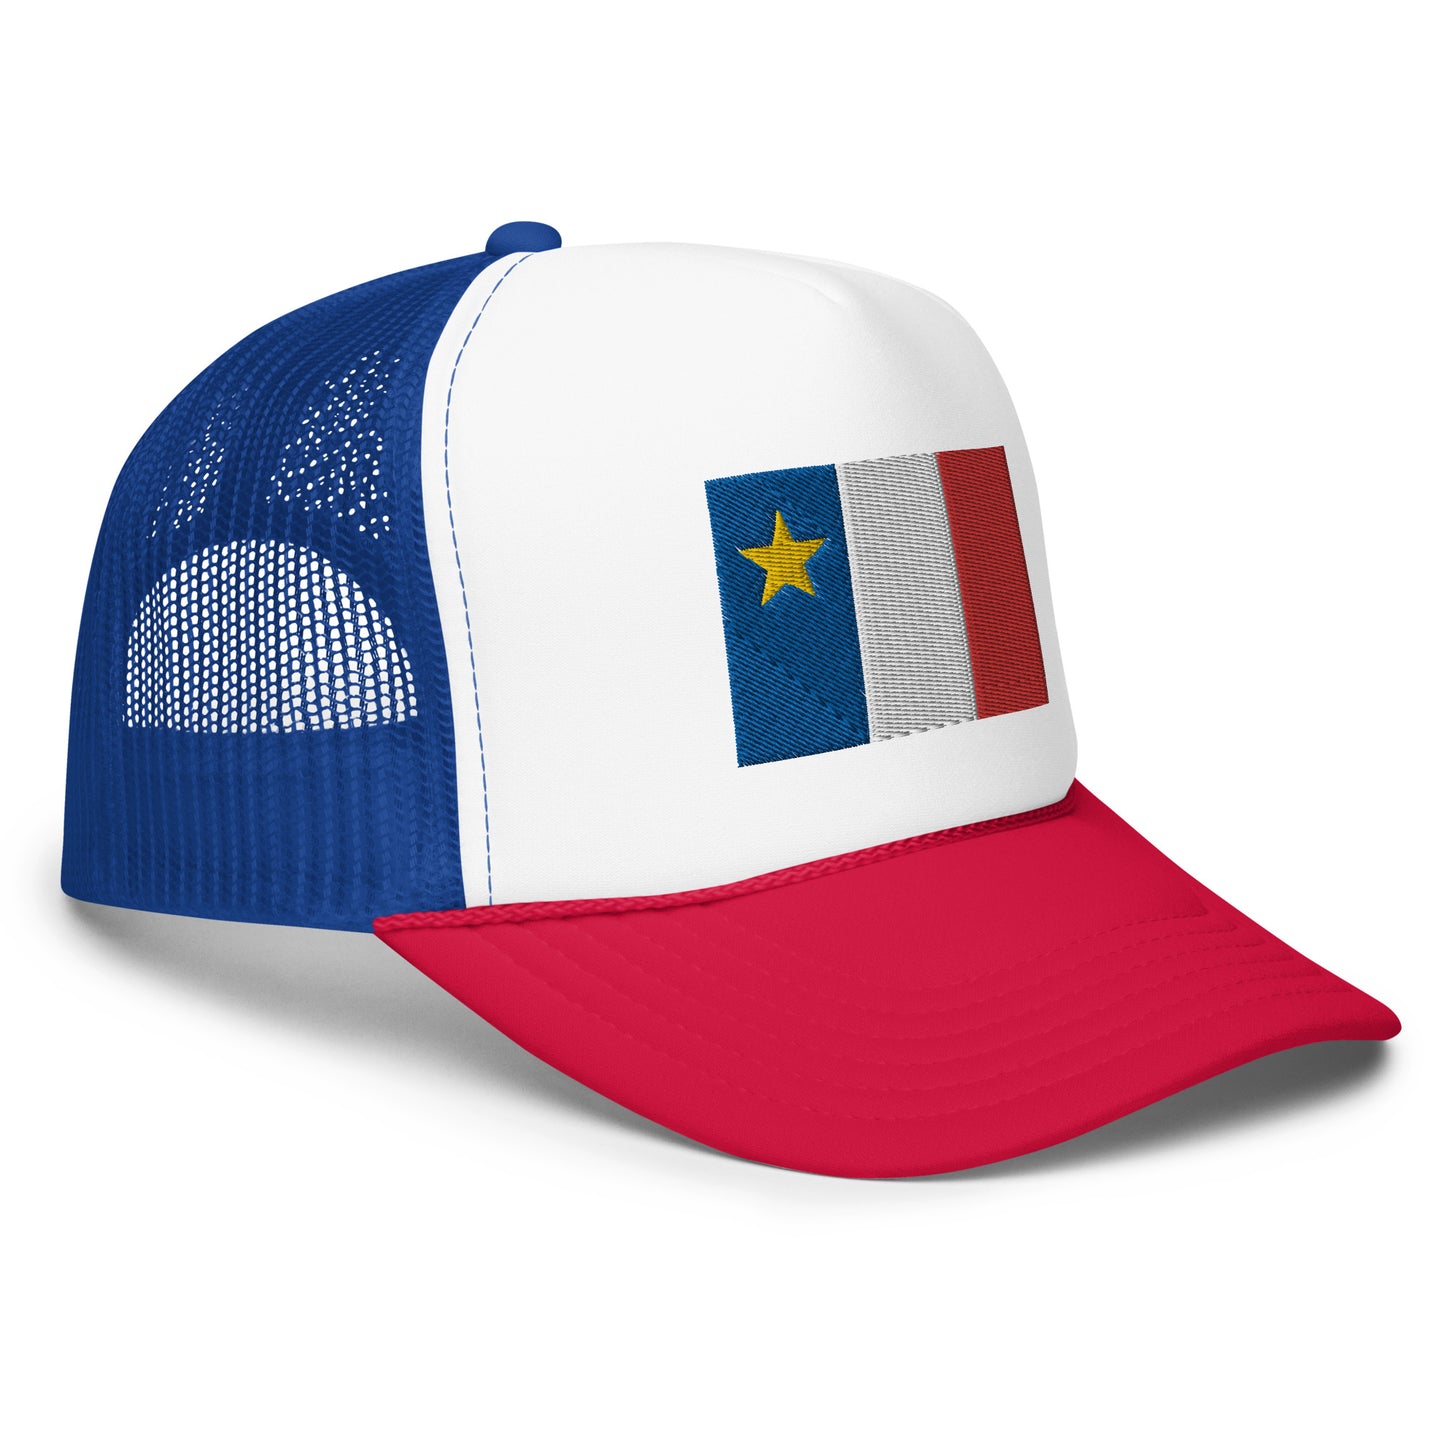 Red, White and Blue Acadian Ball Cap